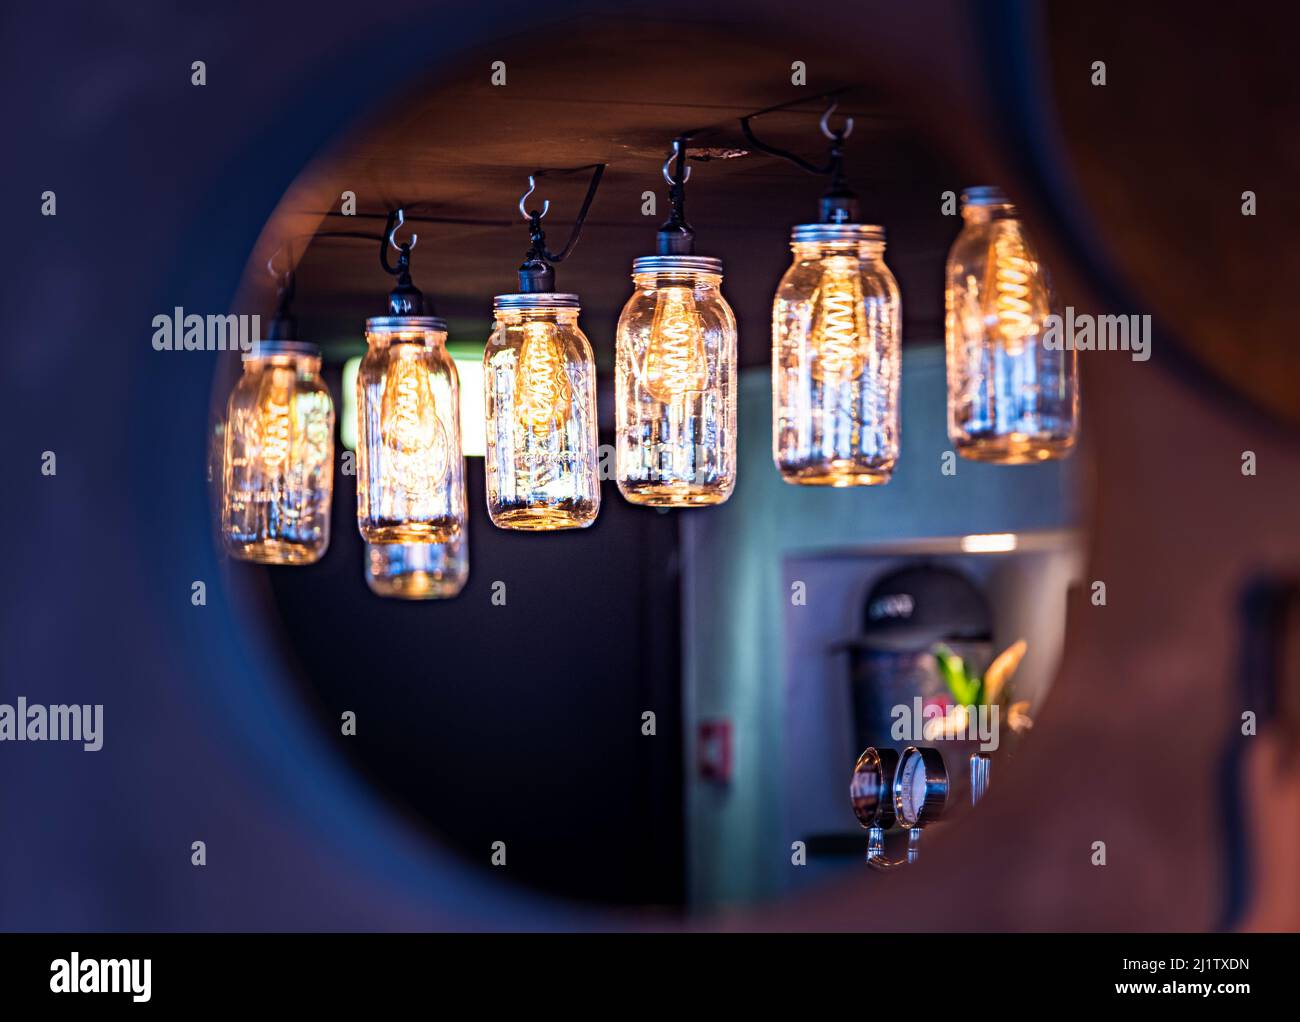 Industrial pub interior with cosy hanging lights in glass boxes through a circular mirror. Industrial interior architecture design with ceiling lights Stock Photo